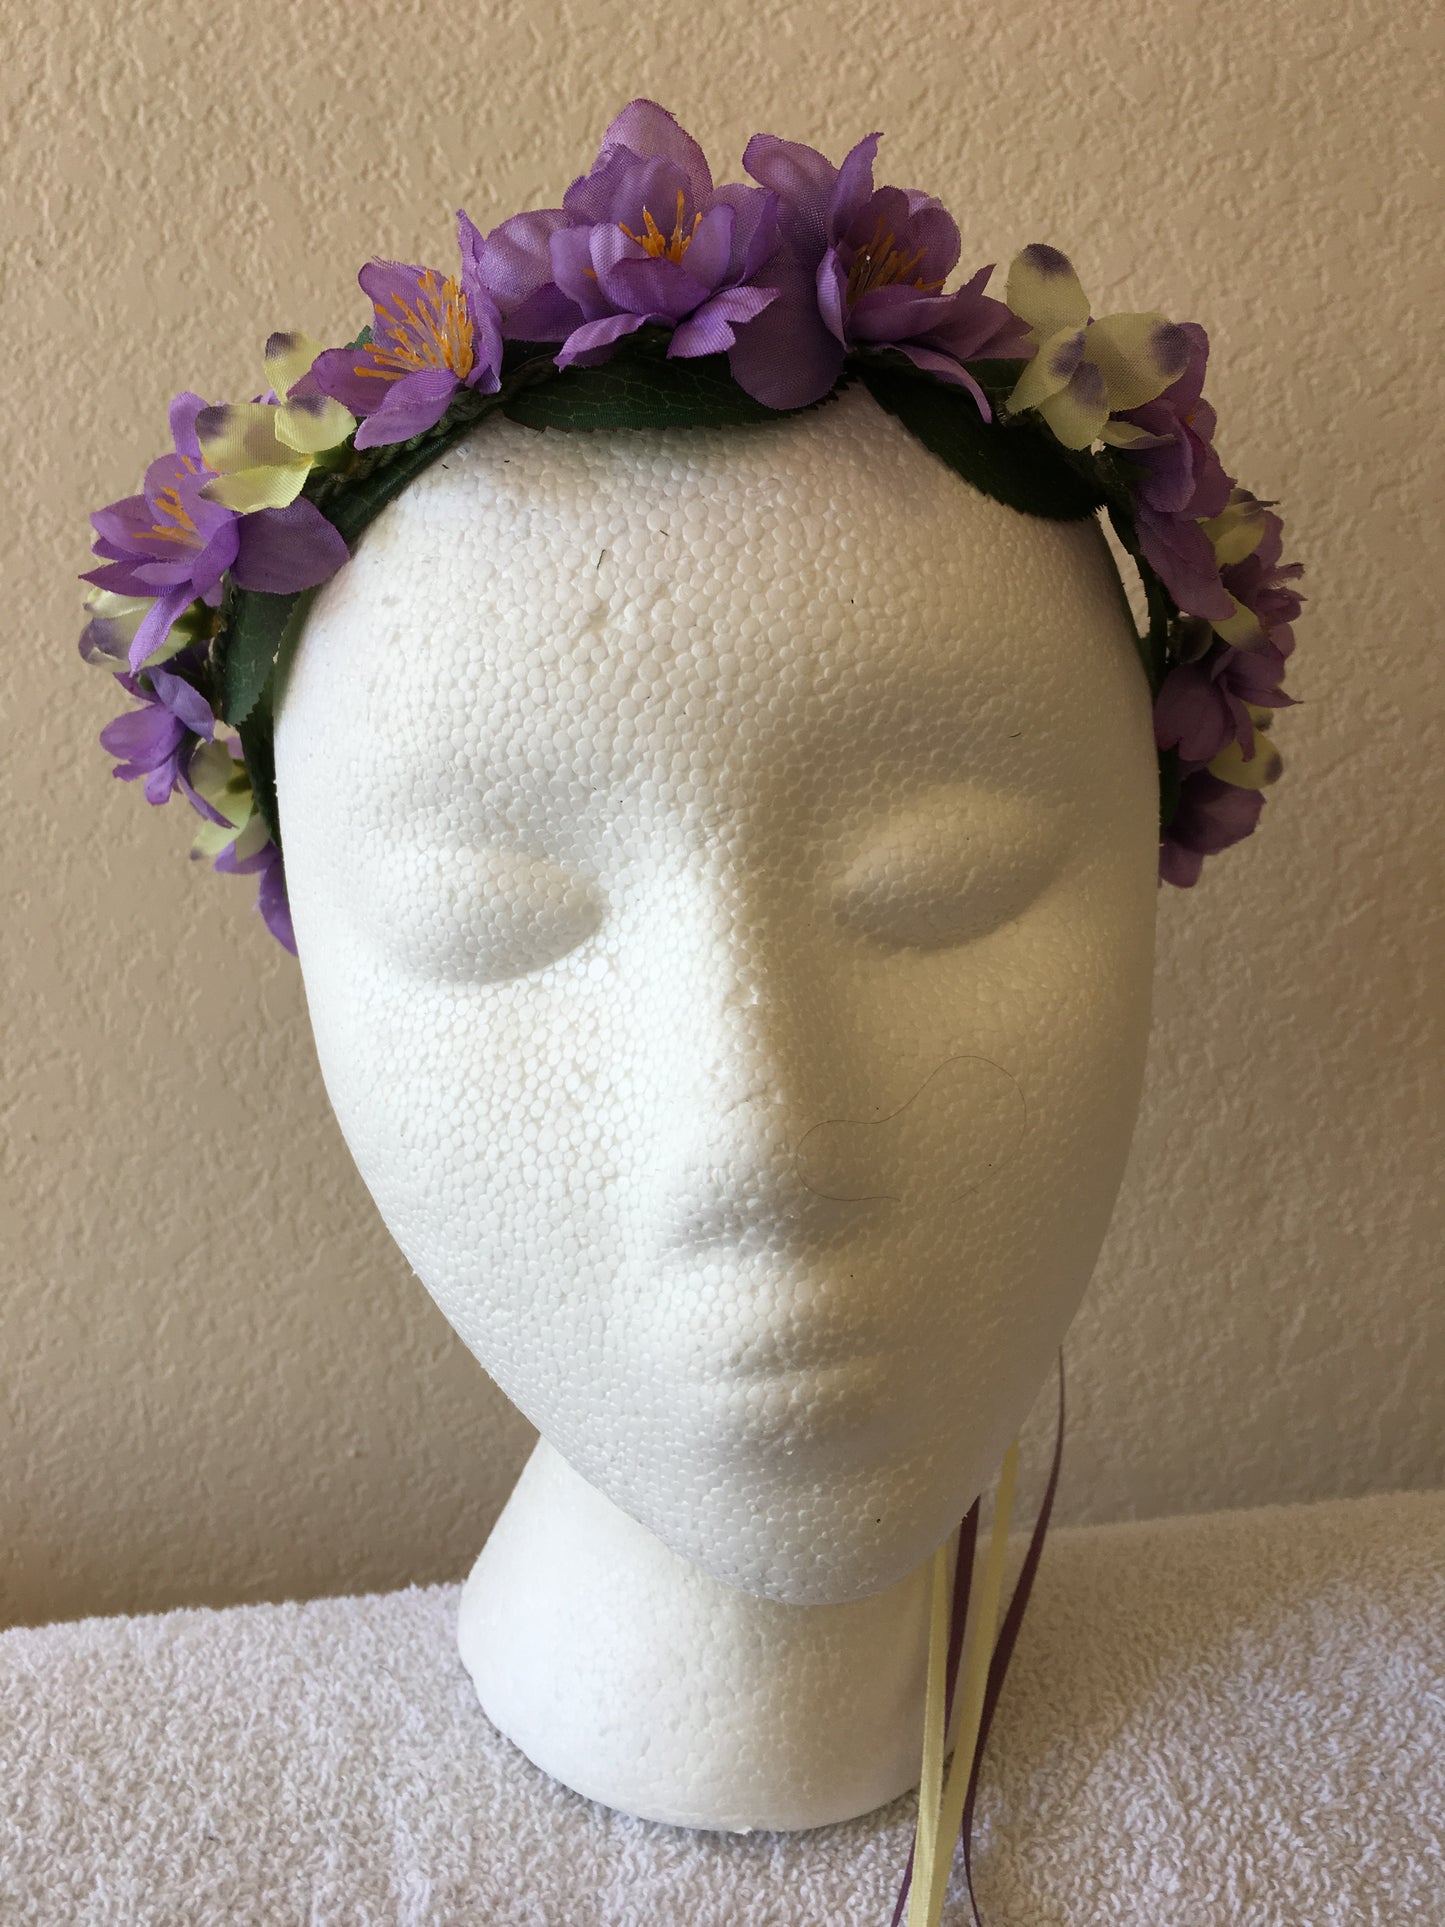 Extra Small Wreath - Purple flowers w/ small pale flower accents